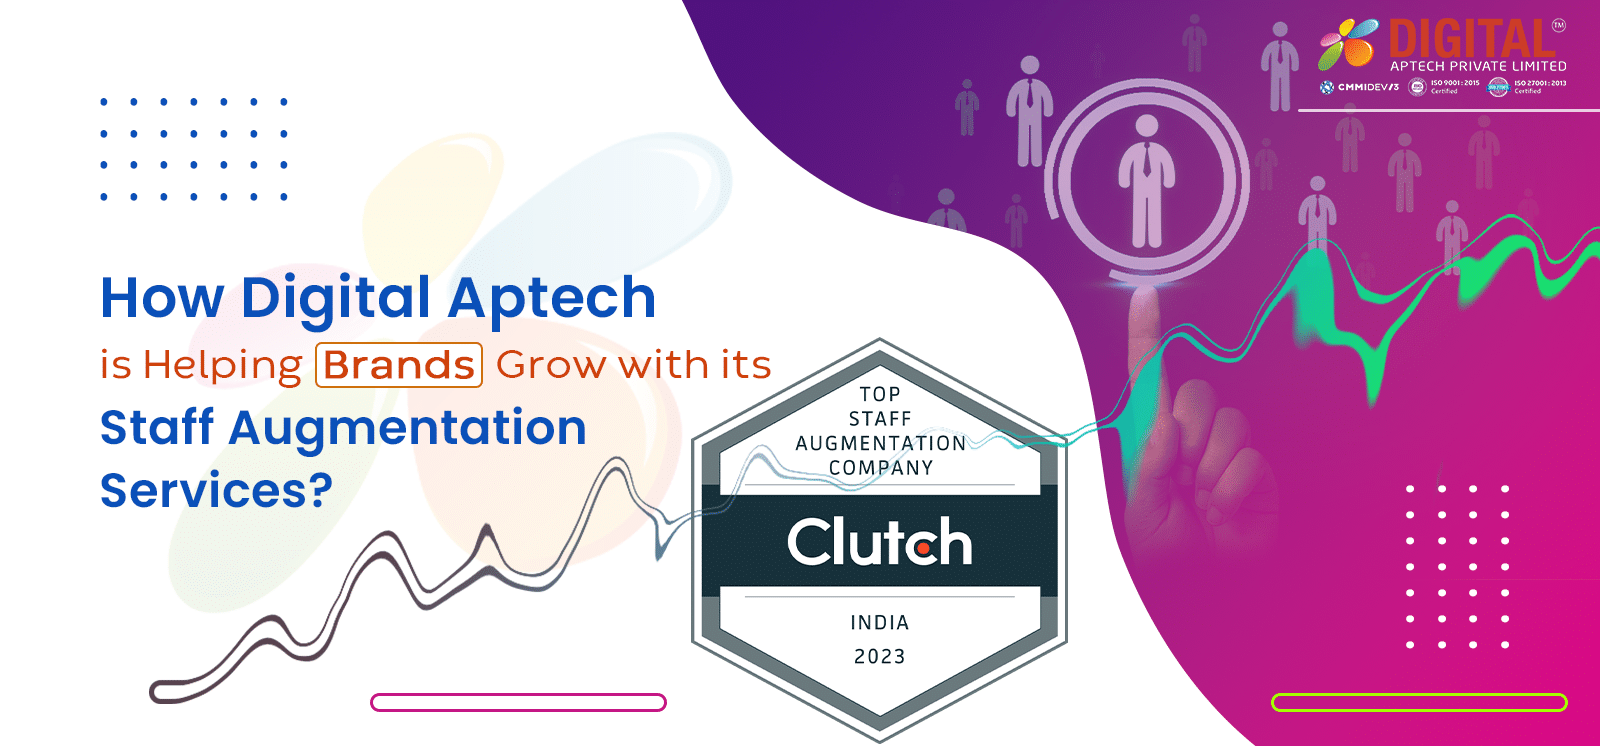 How Digital Aptech is Helping Brands Grow with its Staff Augmentation Services?